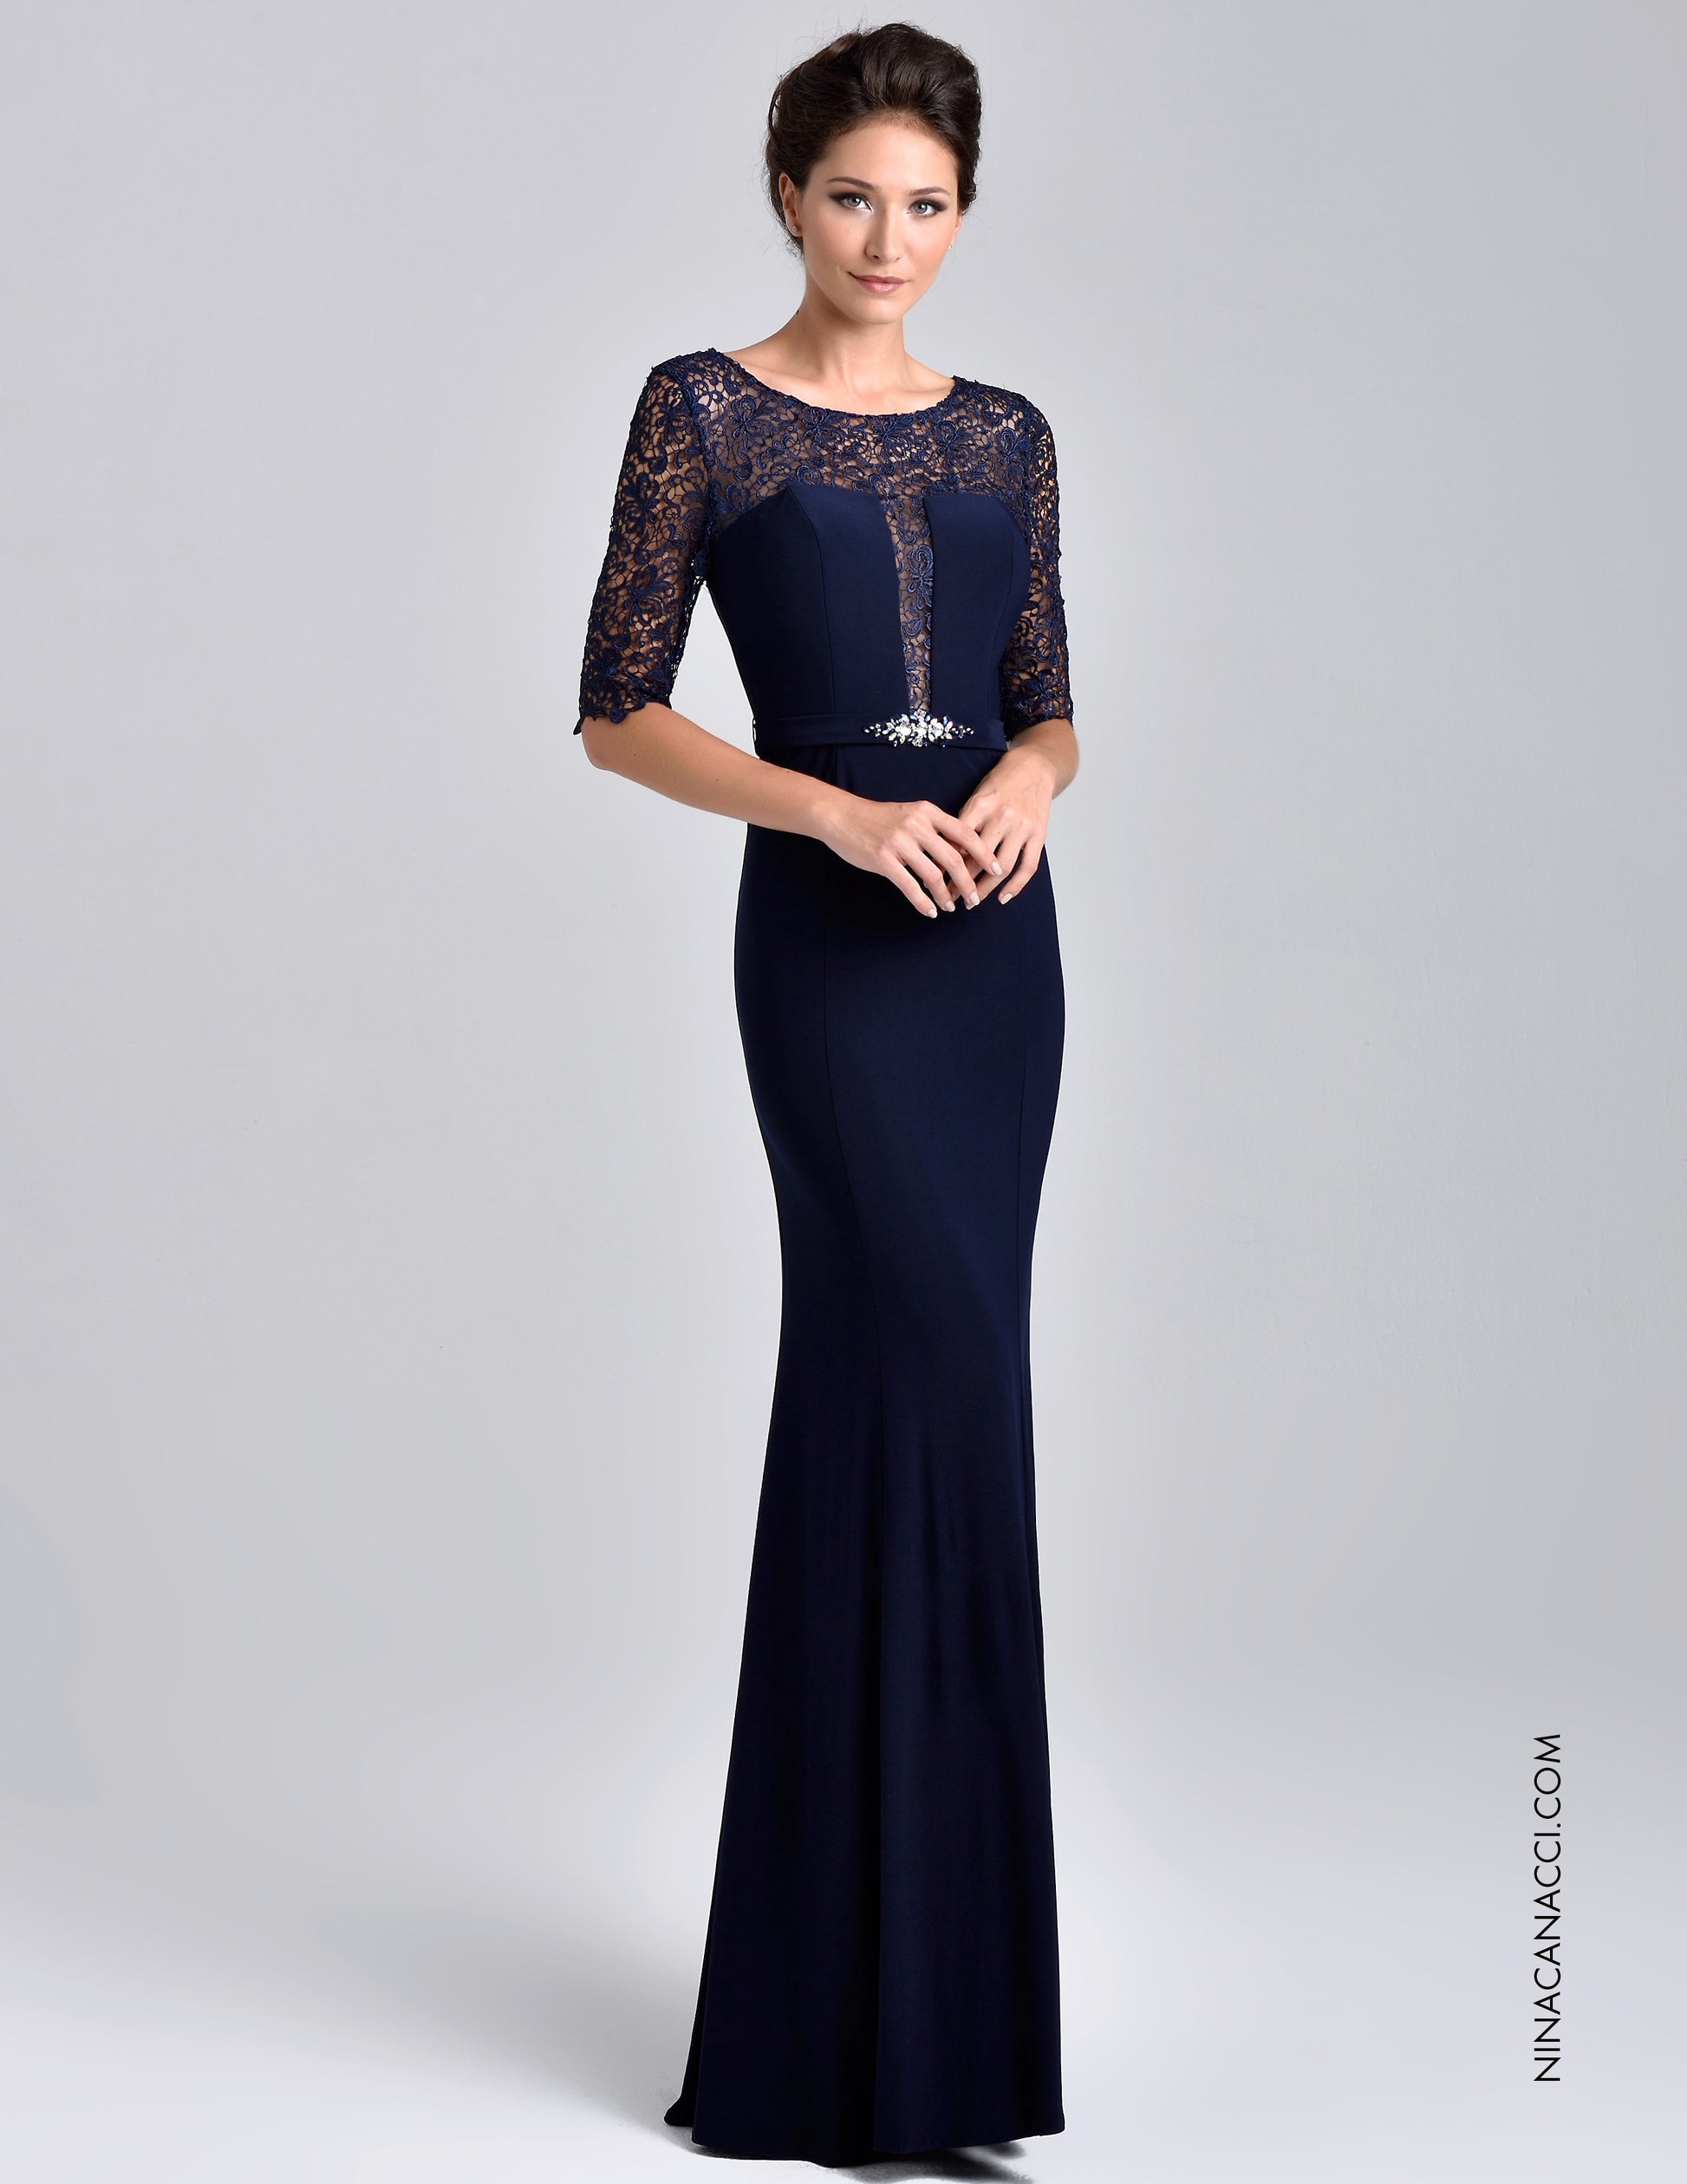 Nina Canacci M218 This stunning evening gown features a scoop neckline with three quarter length sleeves. Sheer lace wraps the top, glides down the center bodice and rounds the slim waist. Accenting the front side of the band are clustered beads that add sparkle and flair. The slim silhouette will showcase your best figure with the full length hem completes the impressive look. Available Sizes: 6, 8, 10  Available Colors: Taupe